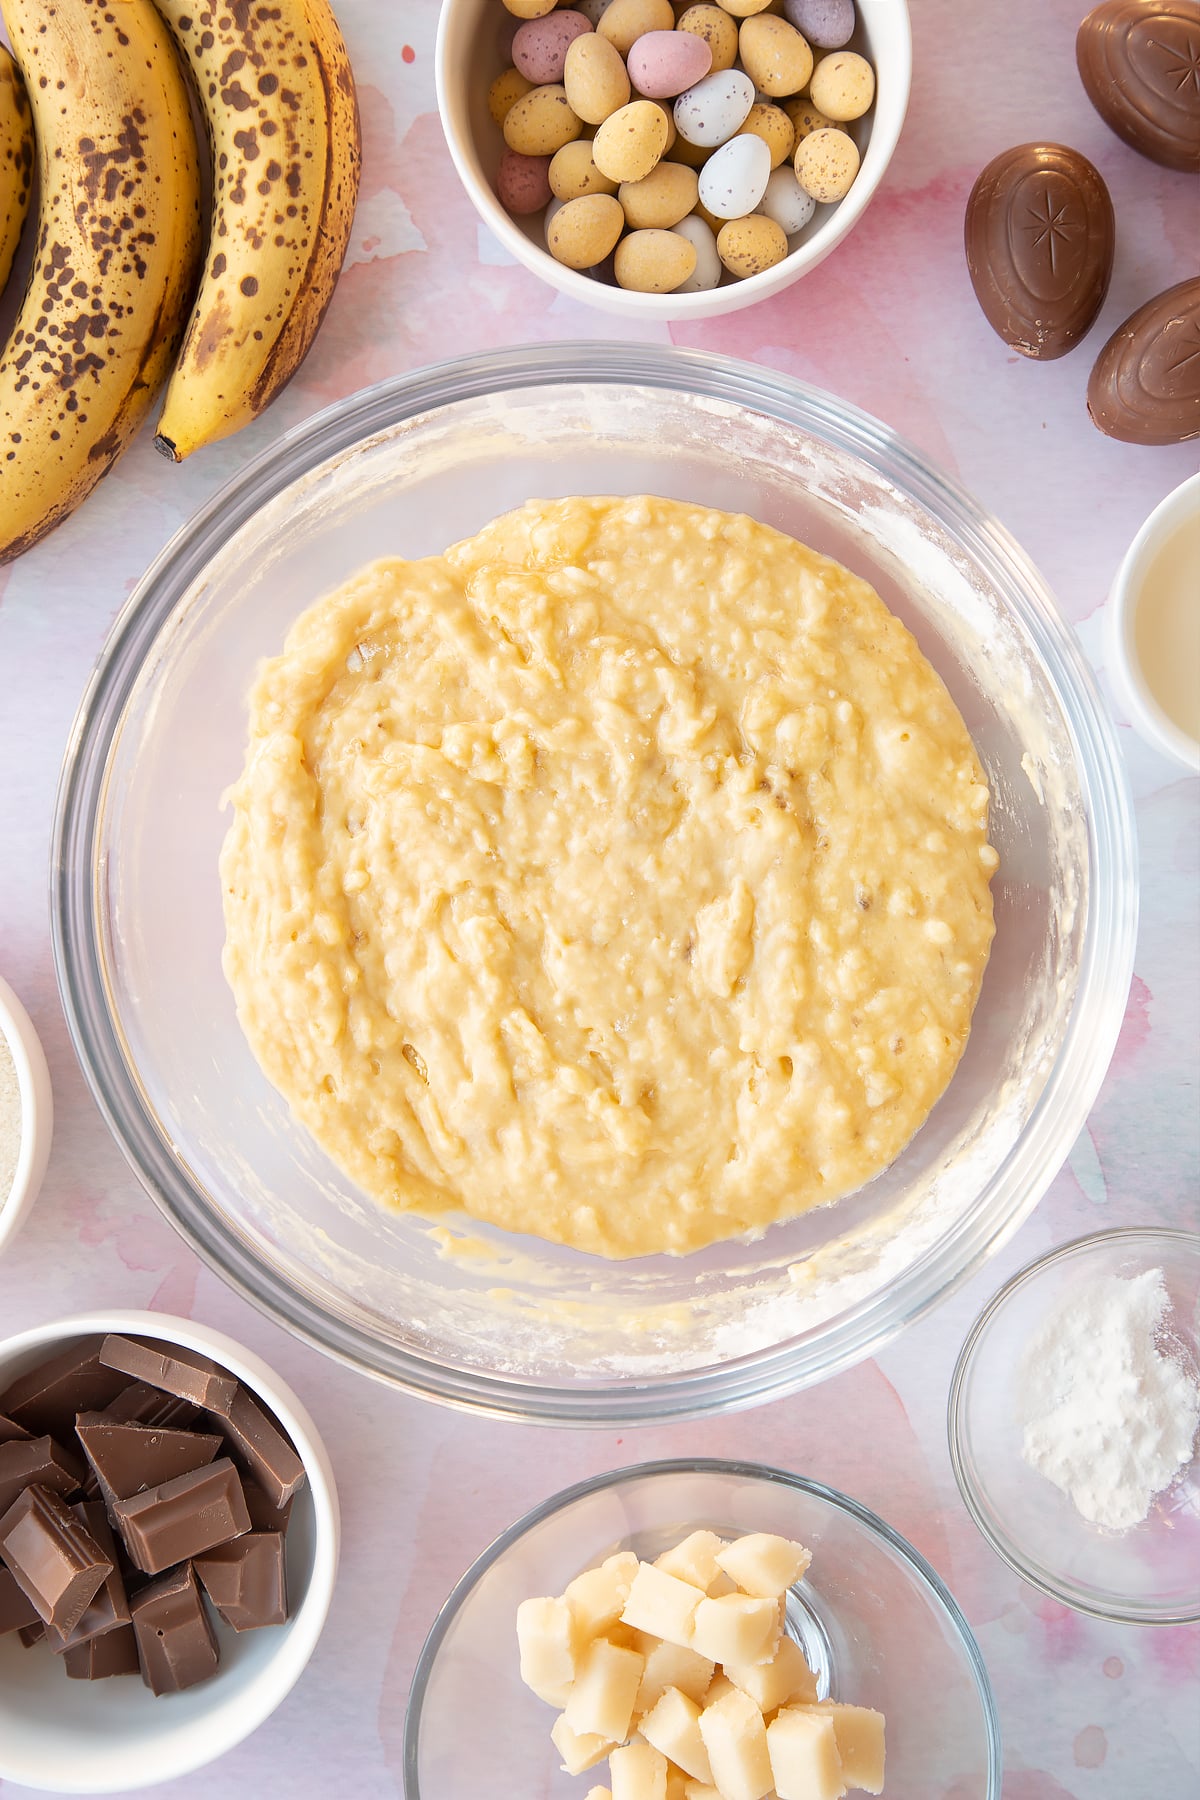 Banana bread batter in a large clear mixing bowl.